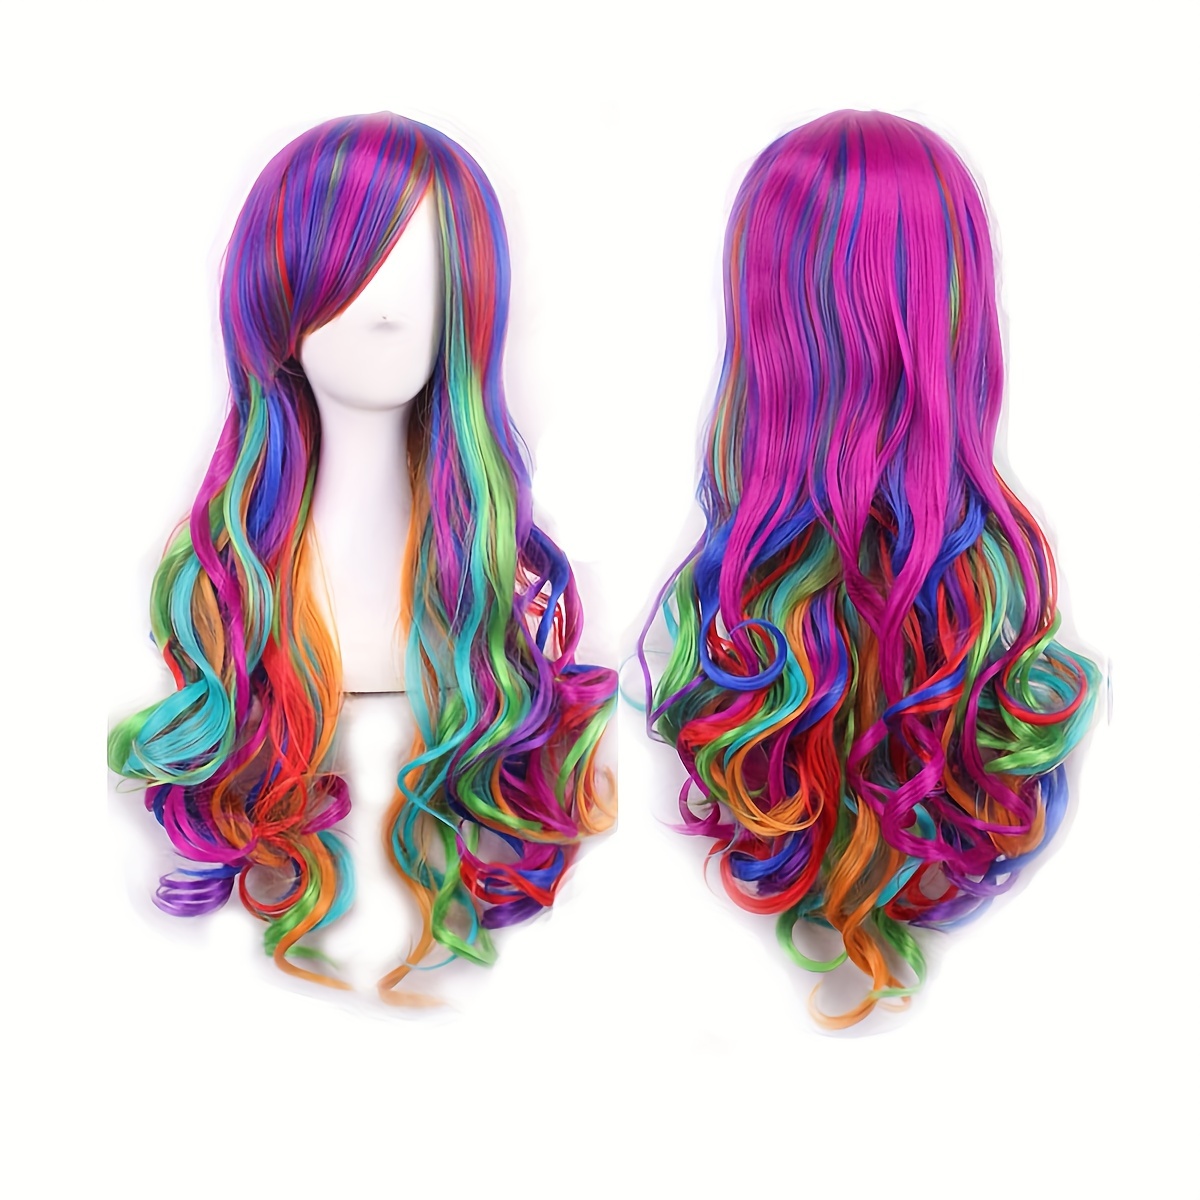 

Costume Wigs Colorful Long Curly Synthetic Wig With Bangs Cosplay Wig For Halloween Cosplay Party Music Festival